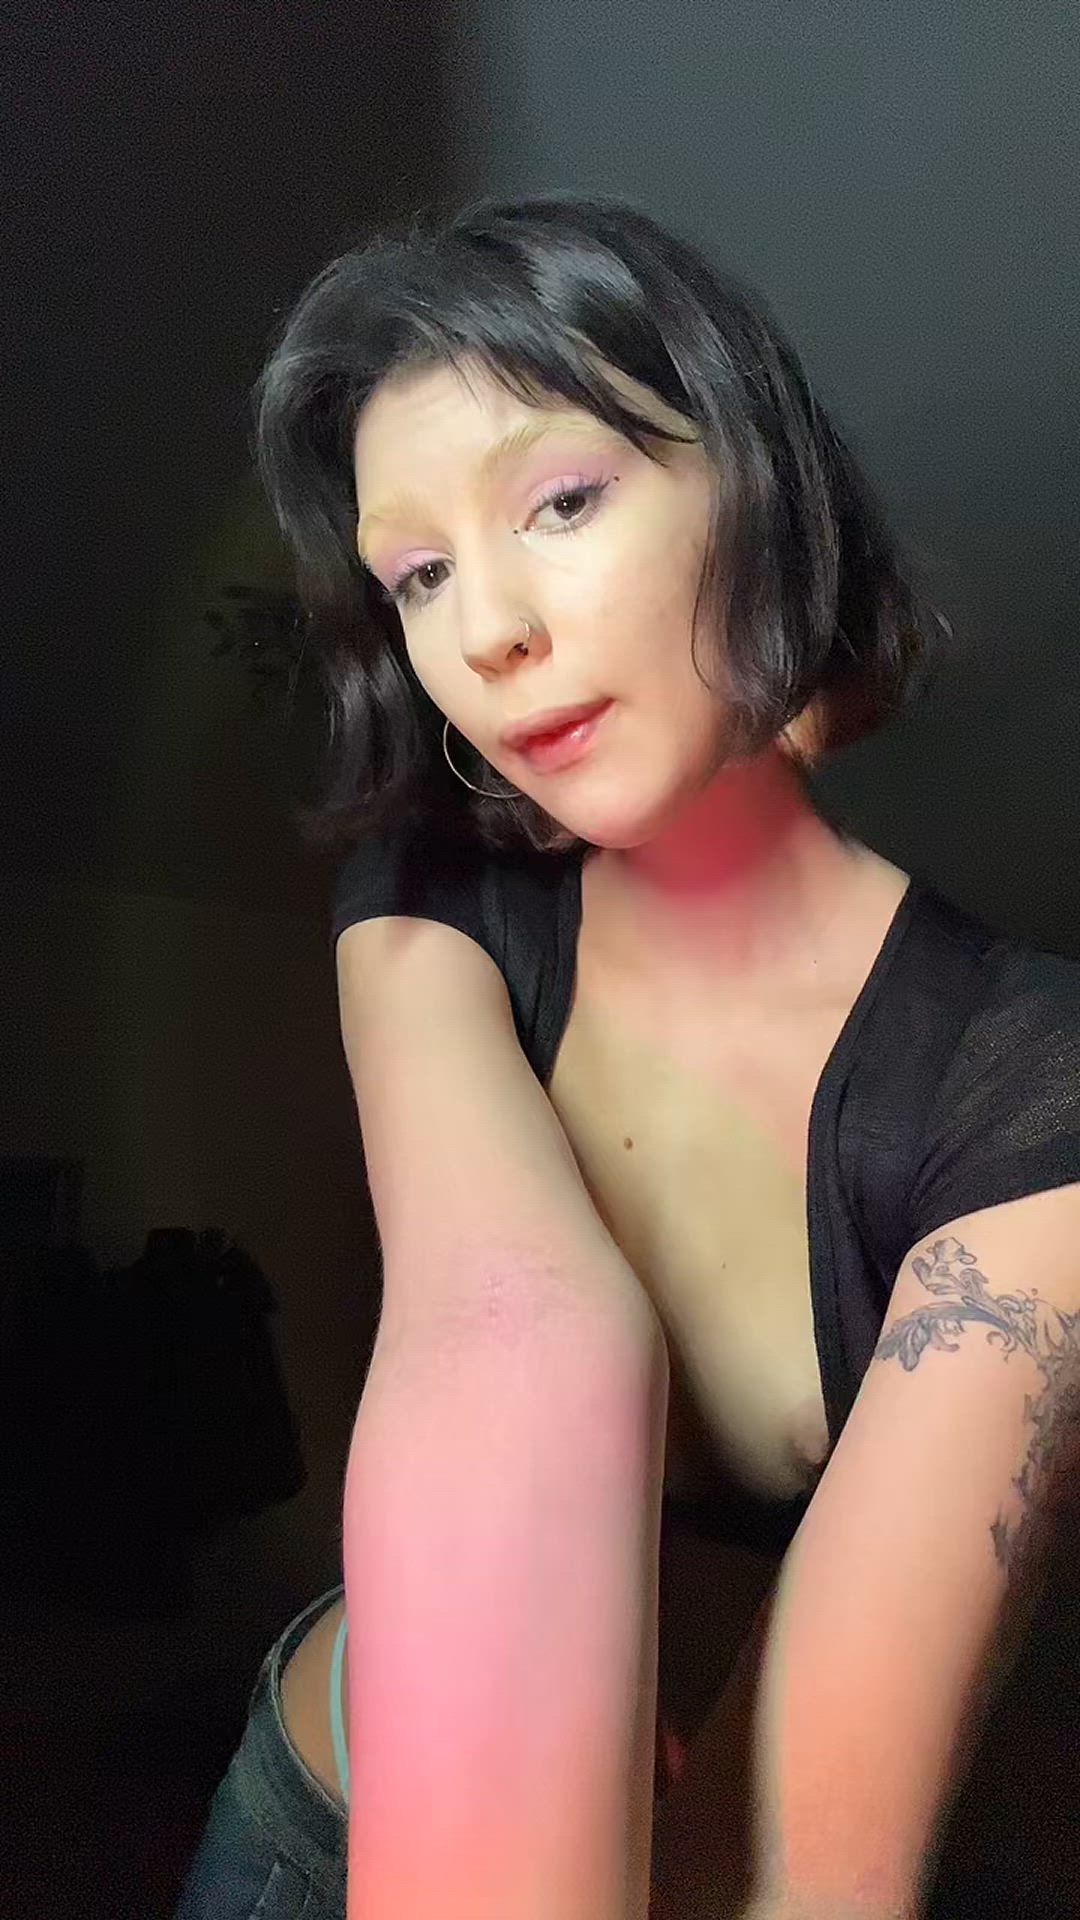 Tits porn video with onlyfans model velvetyx <strong>@velvety_vip</strong>